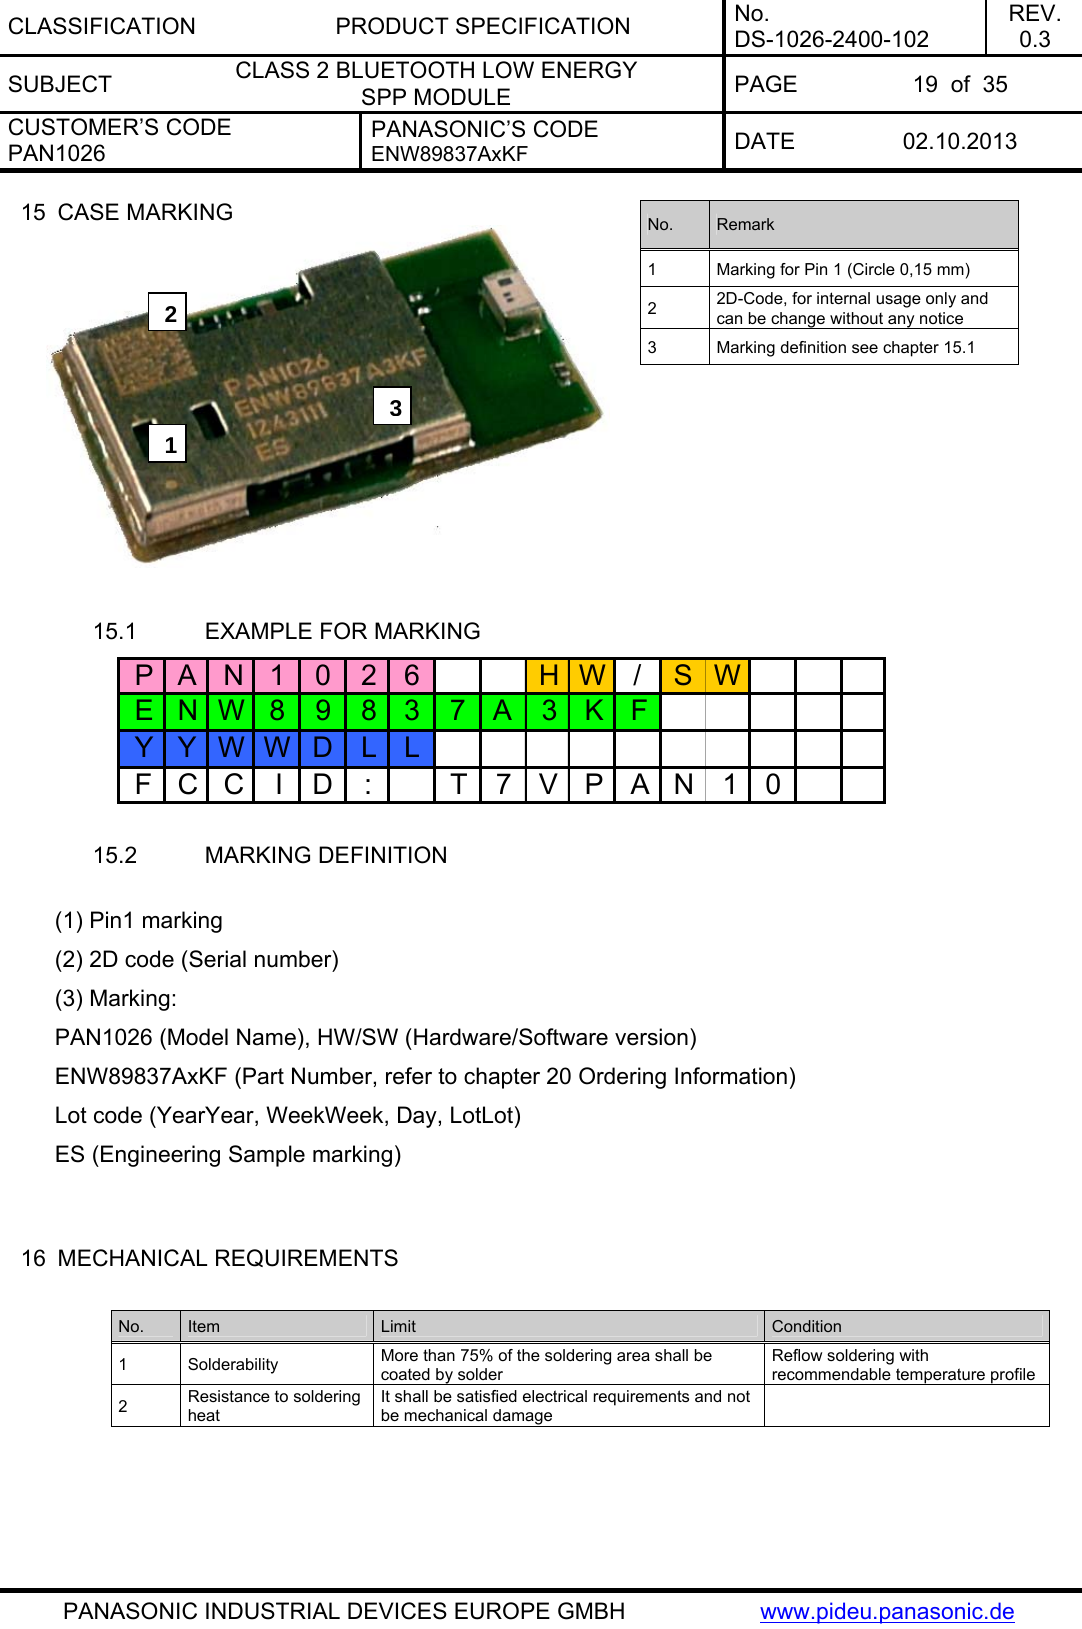 CLASSIFICATION PRODUCT SPECIFICATION No. DS-1026-2400-102 REV. 0.3 SUBJECT  CLASS 2 BLUETOOTH LOW ENERGY  SPP MODULE  PAGE  19  of  35 CUSTOMER’S CODE PAN1026 PANASONIC’S CODE ENW89837AxKF  DATE 02.10.2013   PANASONIC INDUSTRIAL DEVICES EUROPE GMBH  www.pideu.panasonic.de 15  CASE MARKING  No.  Remark 1  Marking for Pin 1 (Circle 0,15 mm) 2  2D-Code, for internal usage only and can be change without any notice 3  Marking definition see chapter 15.1 231 15.1  EXAMPLE FOR MARKING PAN1026 HW/SWENW89837A3KFYYWWD LLFCCID: T7VPAN10 15.2  MARKING DEFINITION  (1) Pin1 marking (2) 2D code (Serial number) (3) Marking: PAN1026 (Model Name), HW/SW (Hardware/Software version)  ENW89837AxKF (Part Number, refer to chapter 20 Ordering Information)  Lot code (YearYear, WeekWeek, Day, LotLot) ES (Engineering Sample marking)     16  MECHANICAL REQUIREMENTS  No.  Item  Limit  Condition 1 Solderability  More than 75% of the soldering area shall be coated by solder Reflow soldering with recommendable temperature profile 2  Resistance to soldering heat It shall be satisfied electrical requirements and not be mechanical damage     